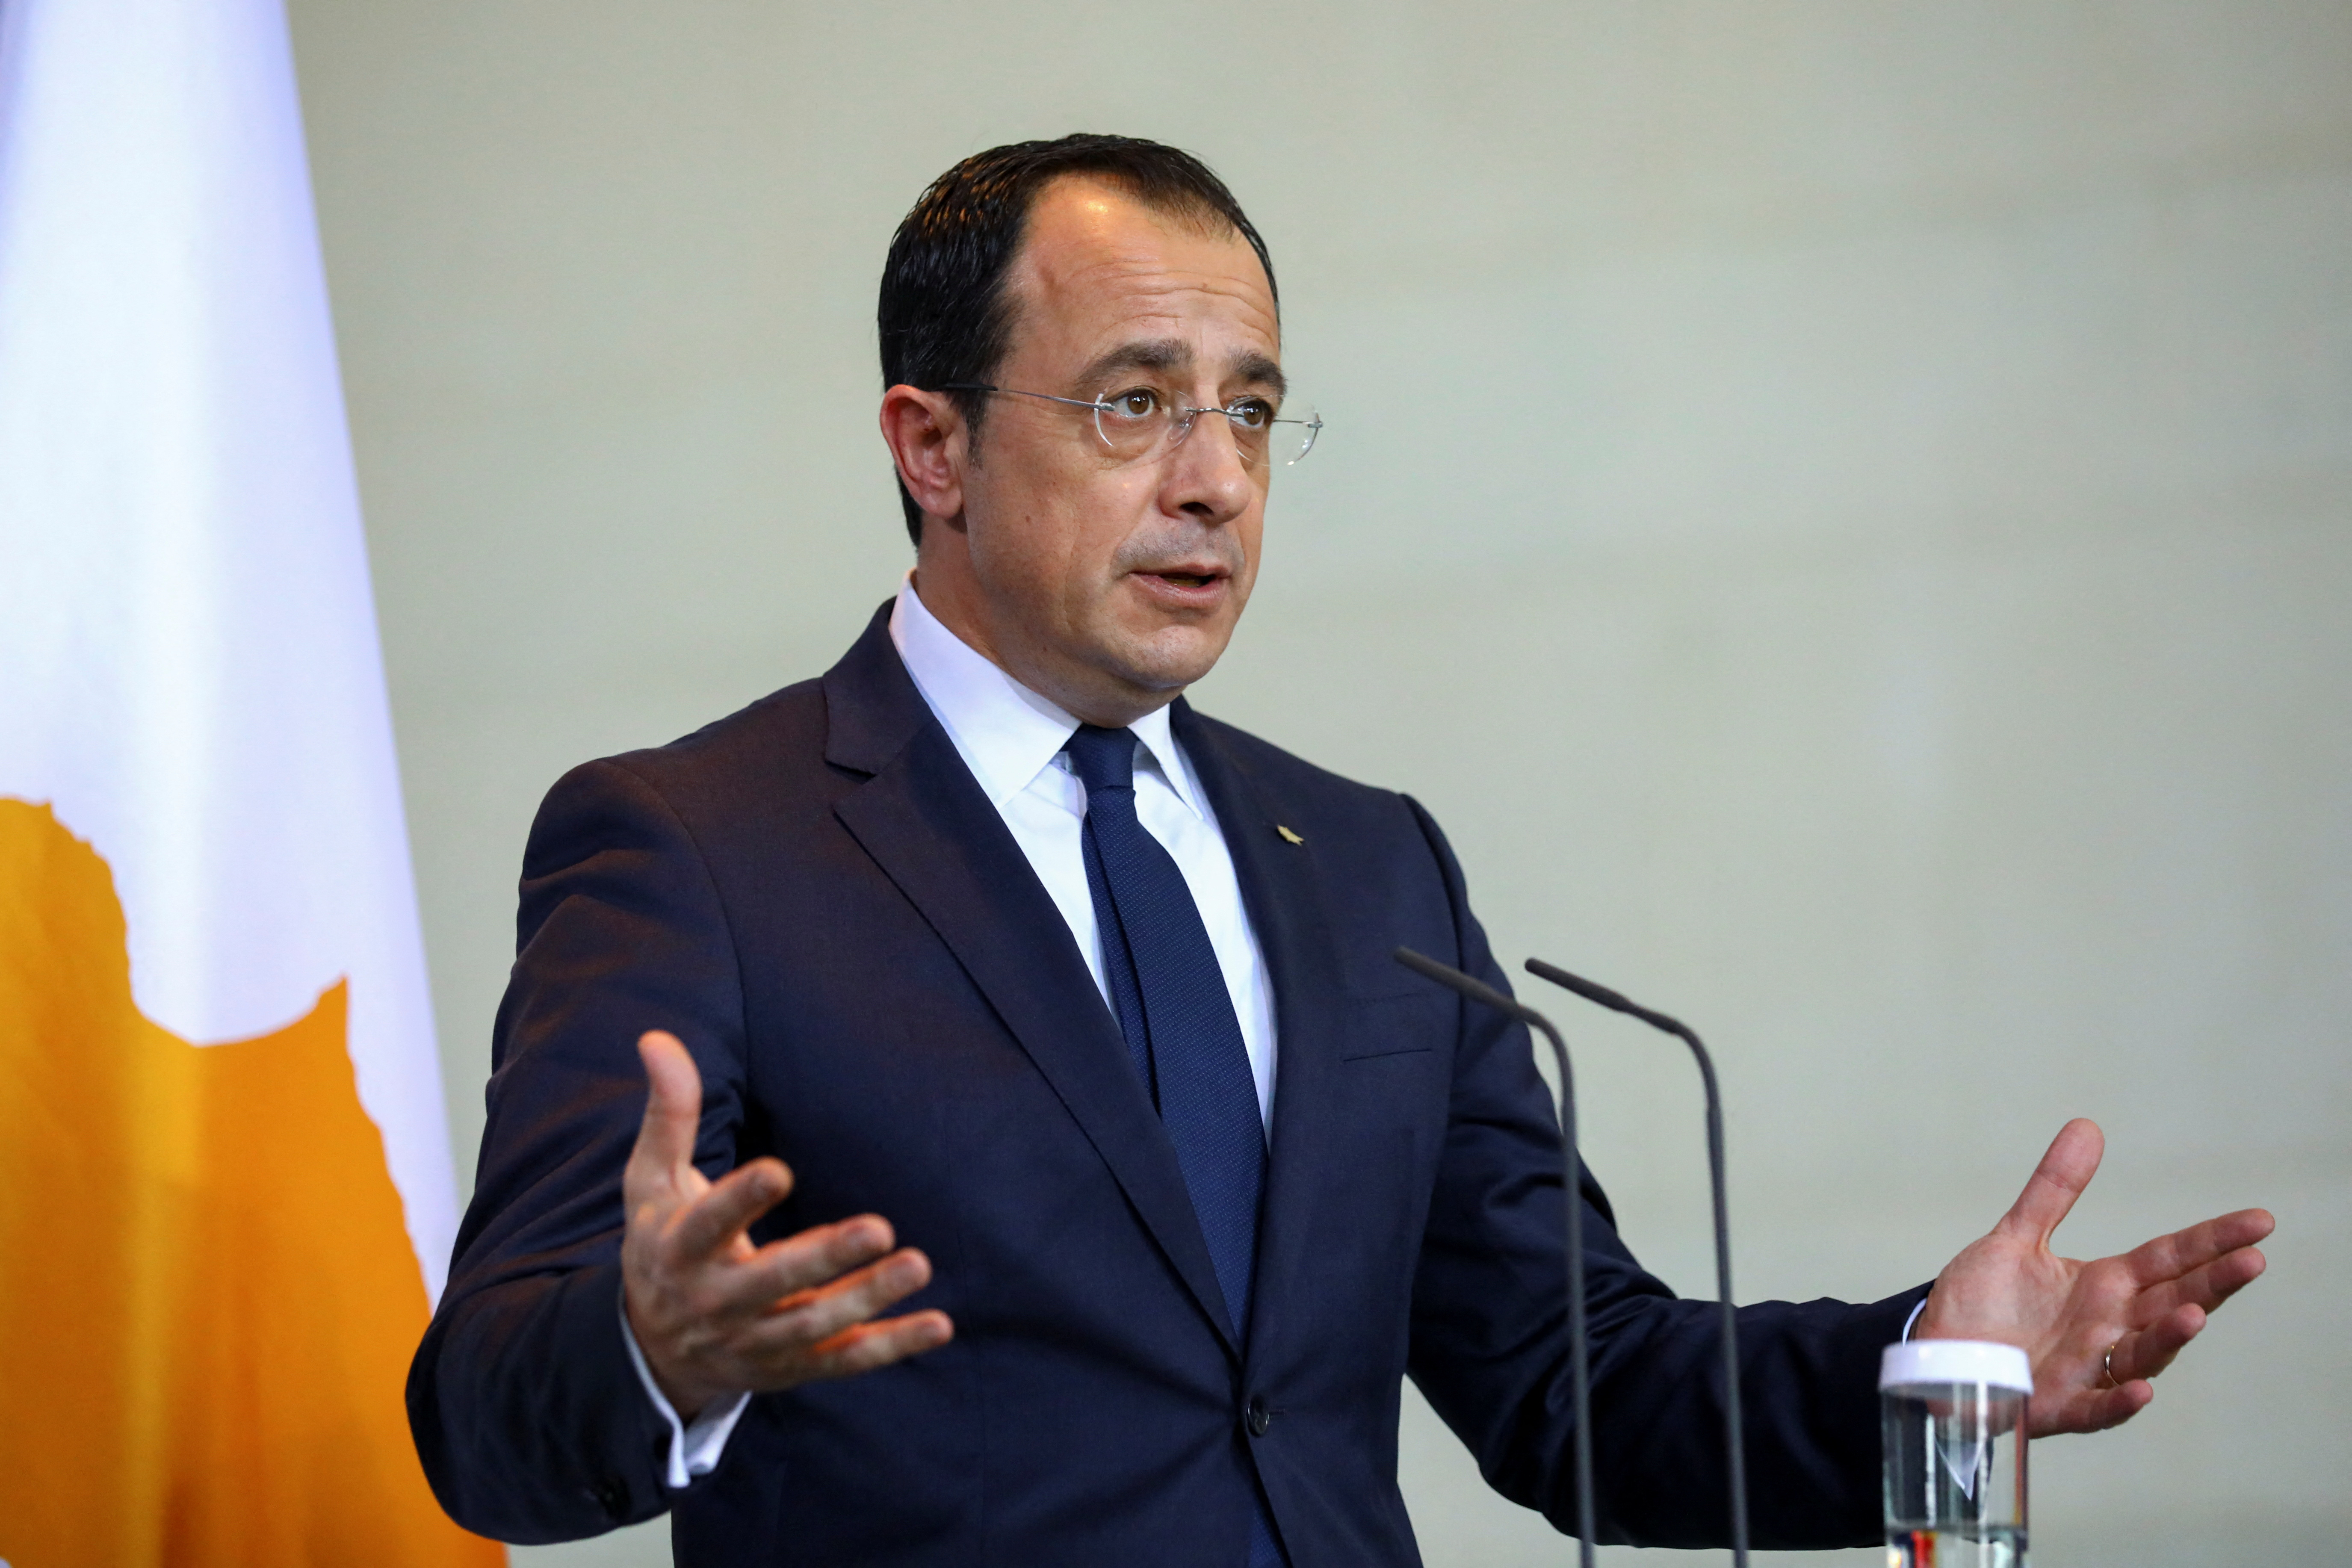 Cypriot President Christodoulides visits Germany